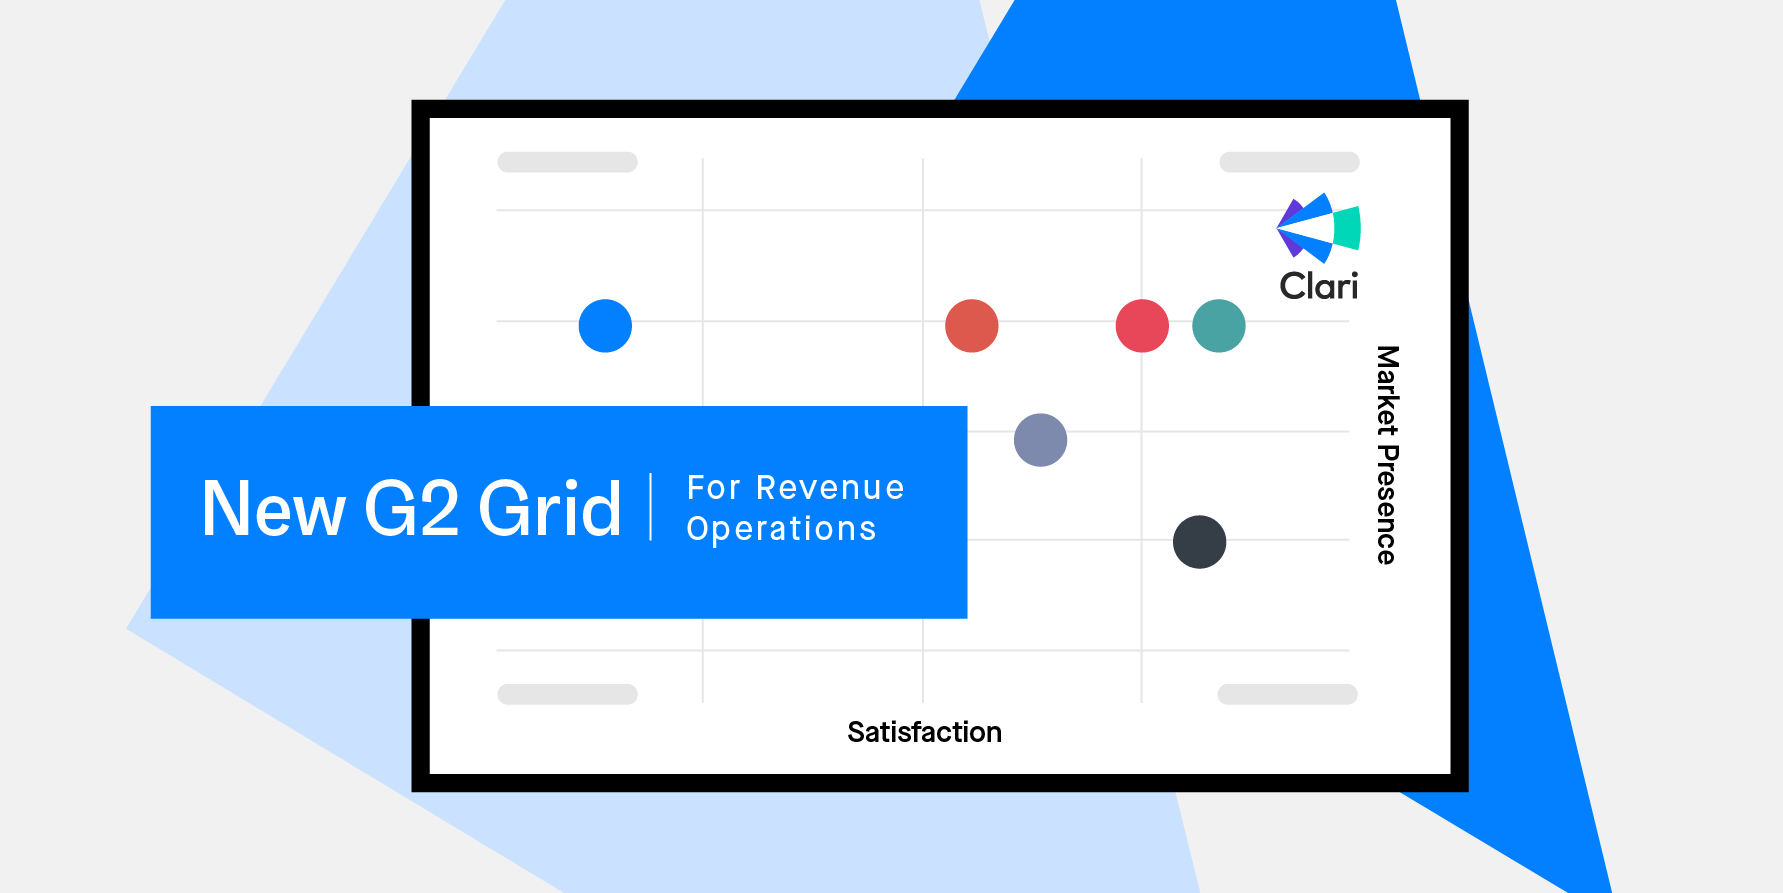 Stylized illustration of the G2 grid for revenue operations showing Clari at the top right